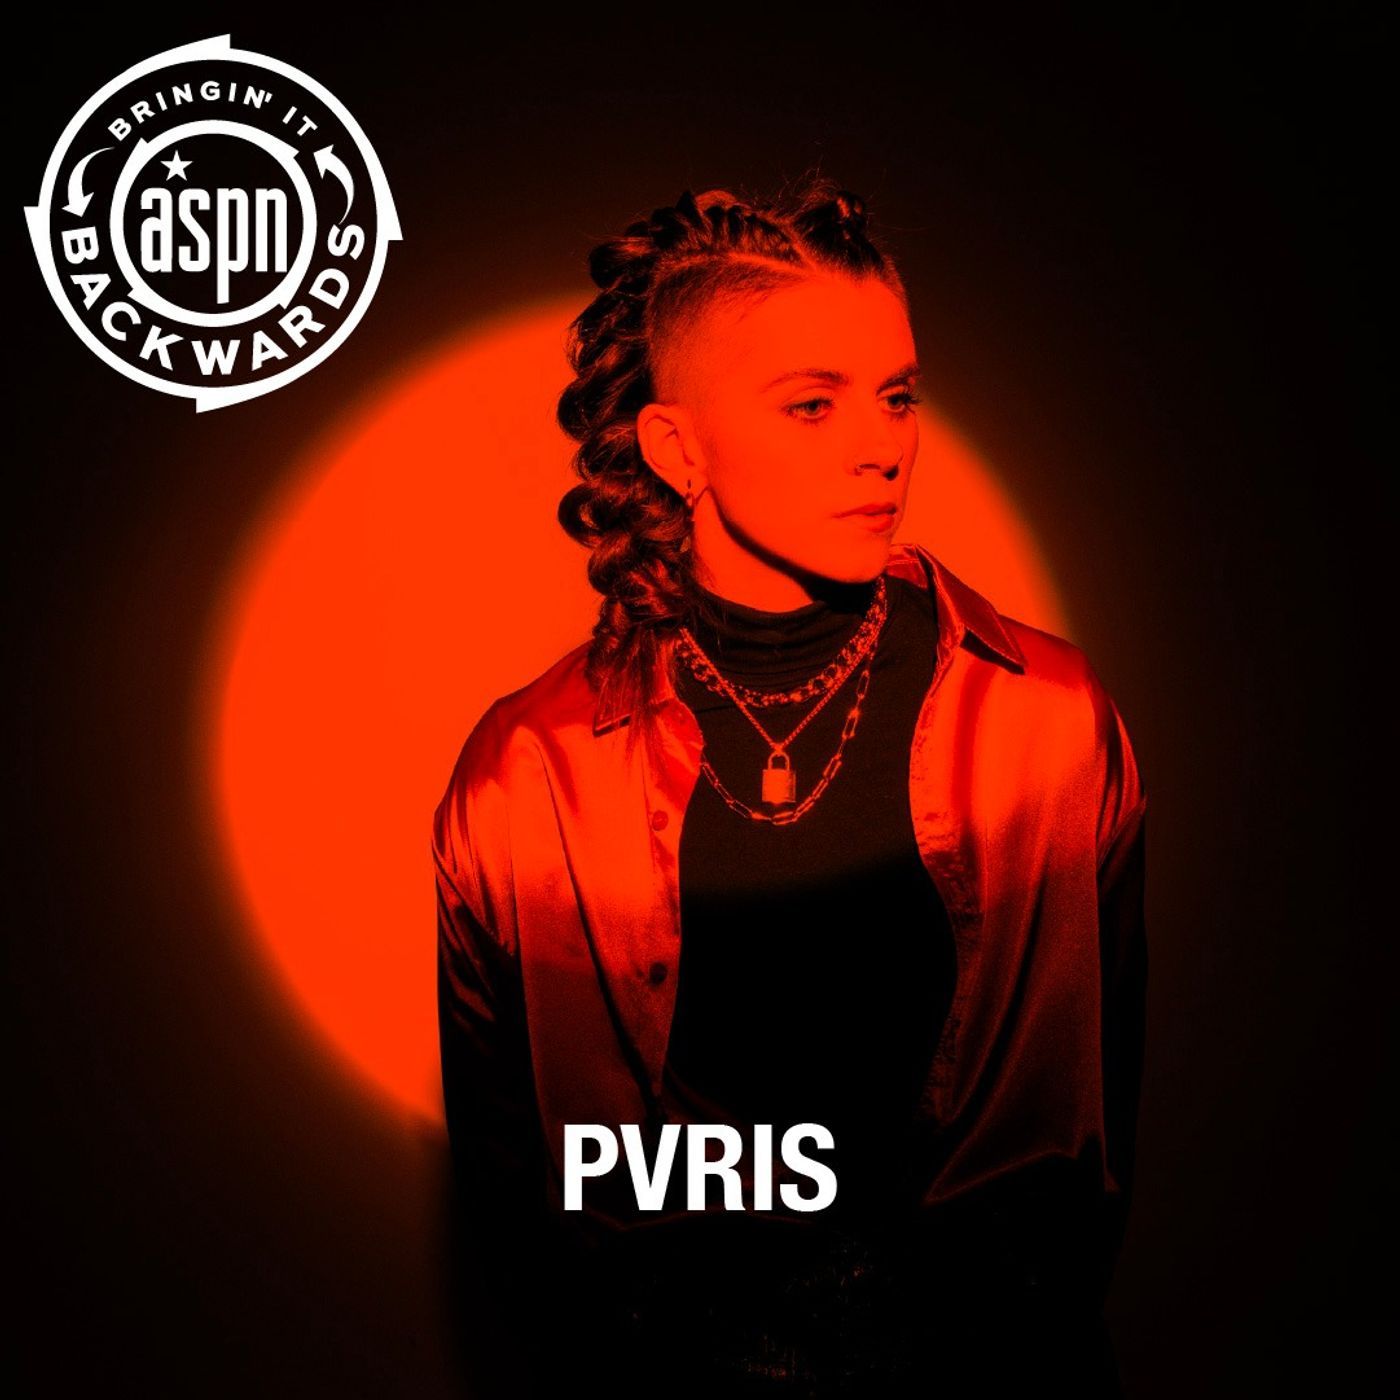 Interview with PVRIS Image